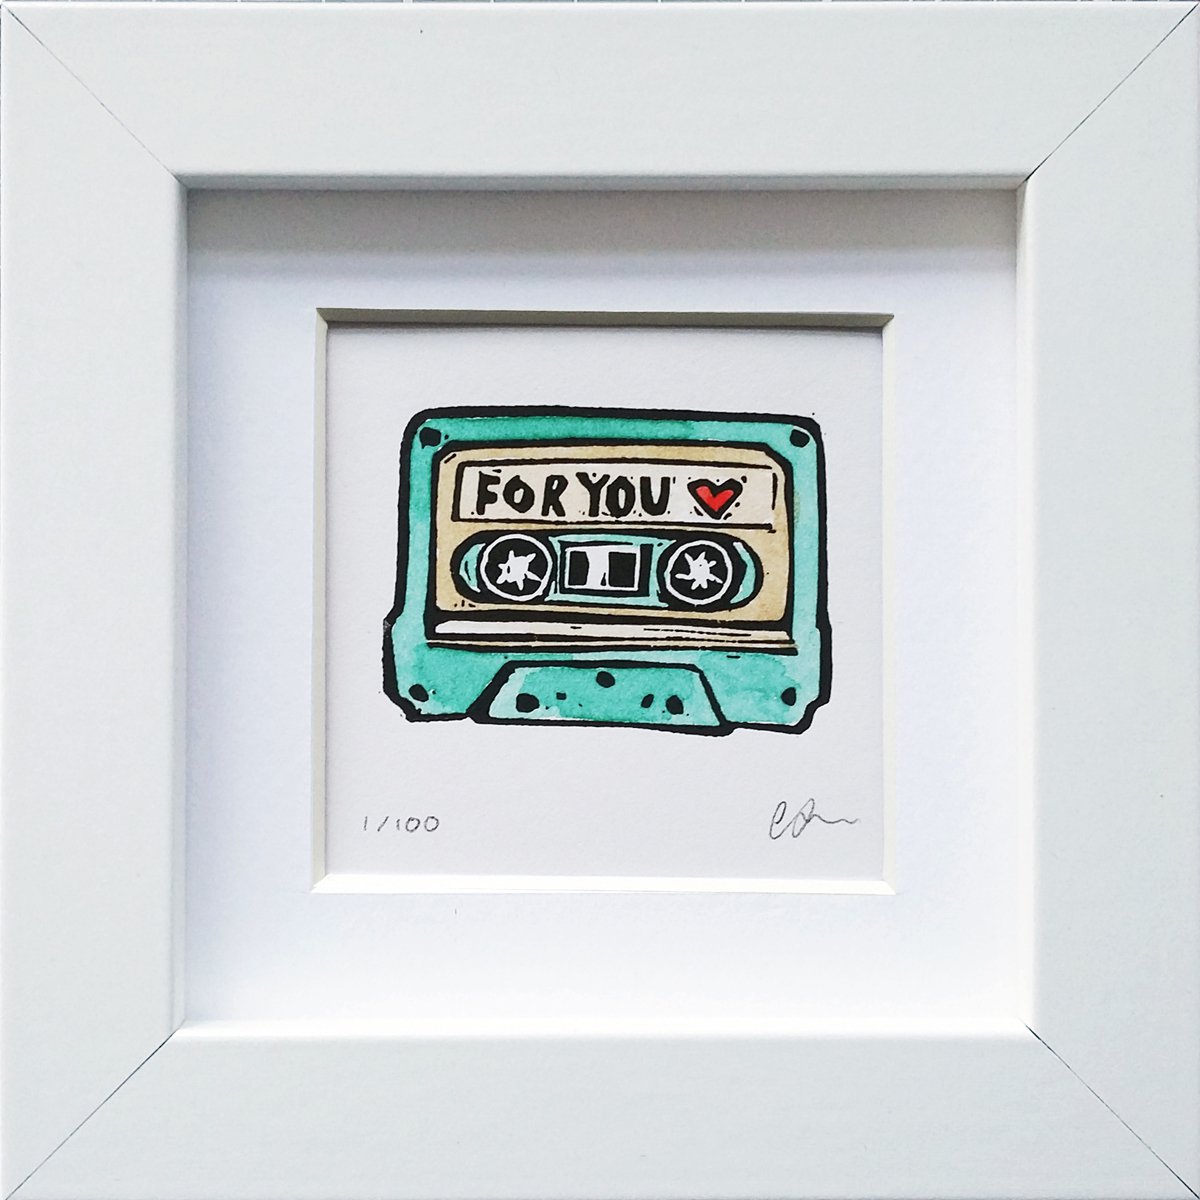 Tiny tapes - Turquoise for you Tape by Carolynne Coulson